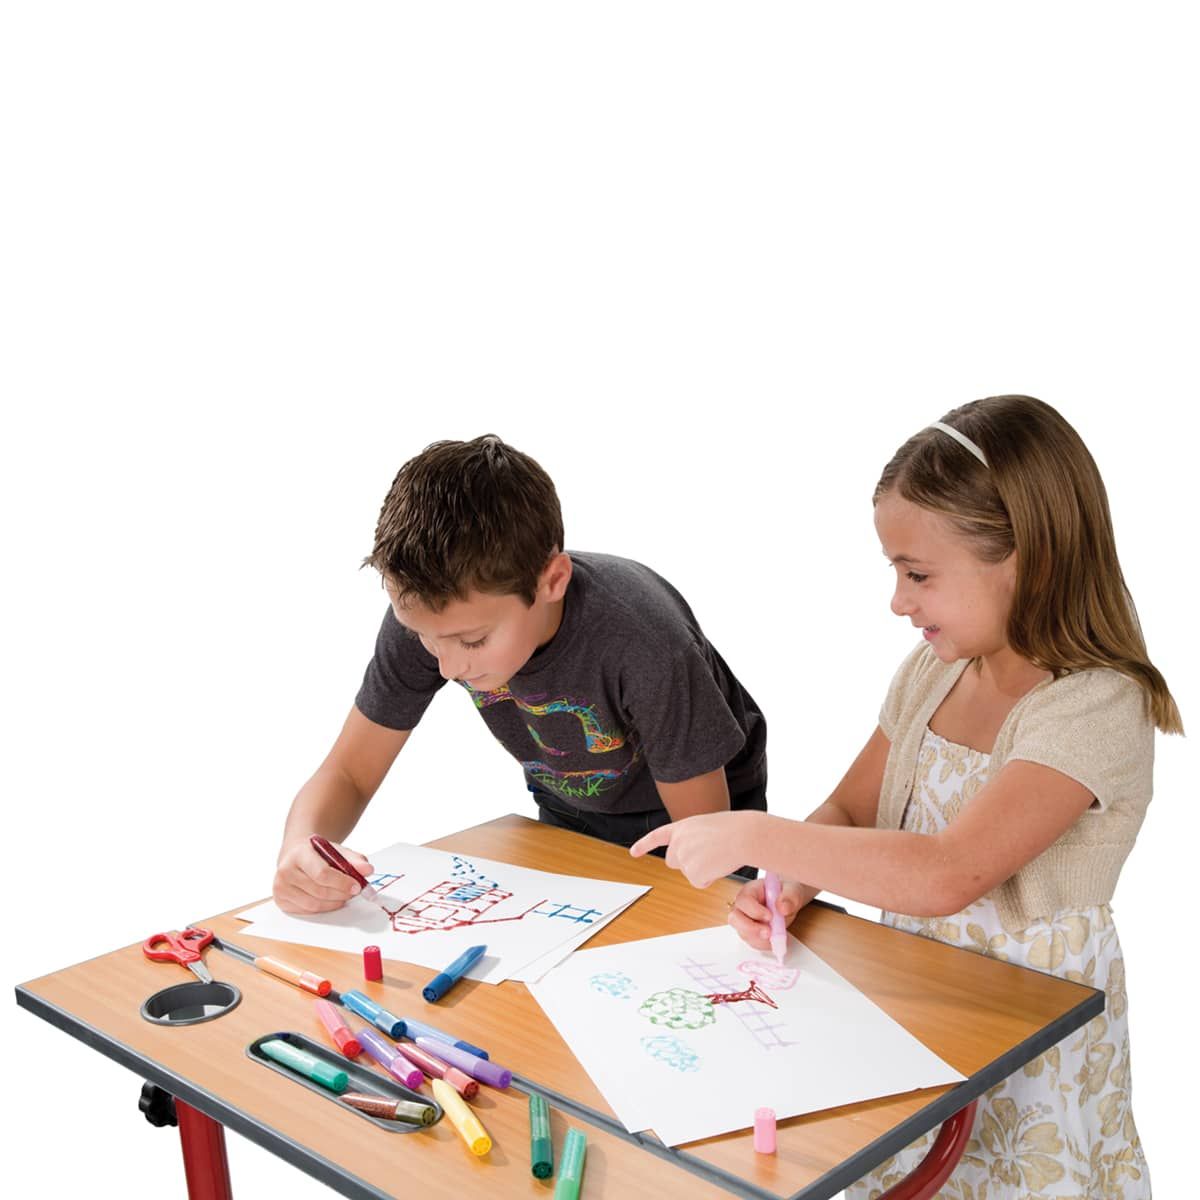 Young artists will love creating and admiring their 3D masterpieces!